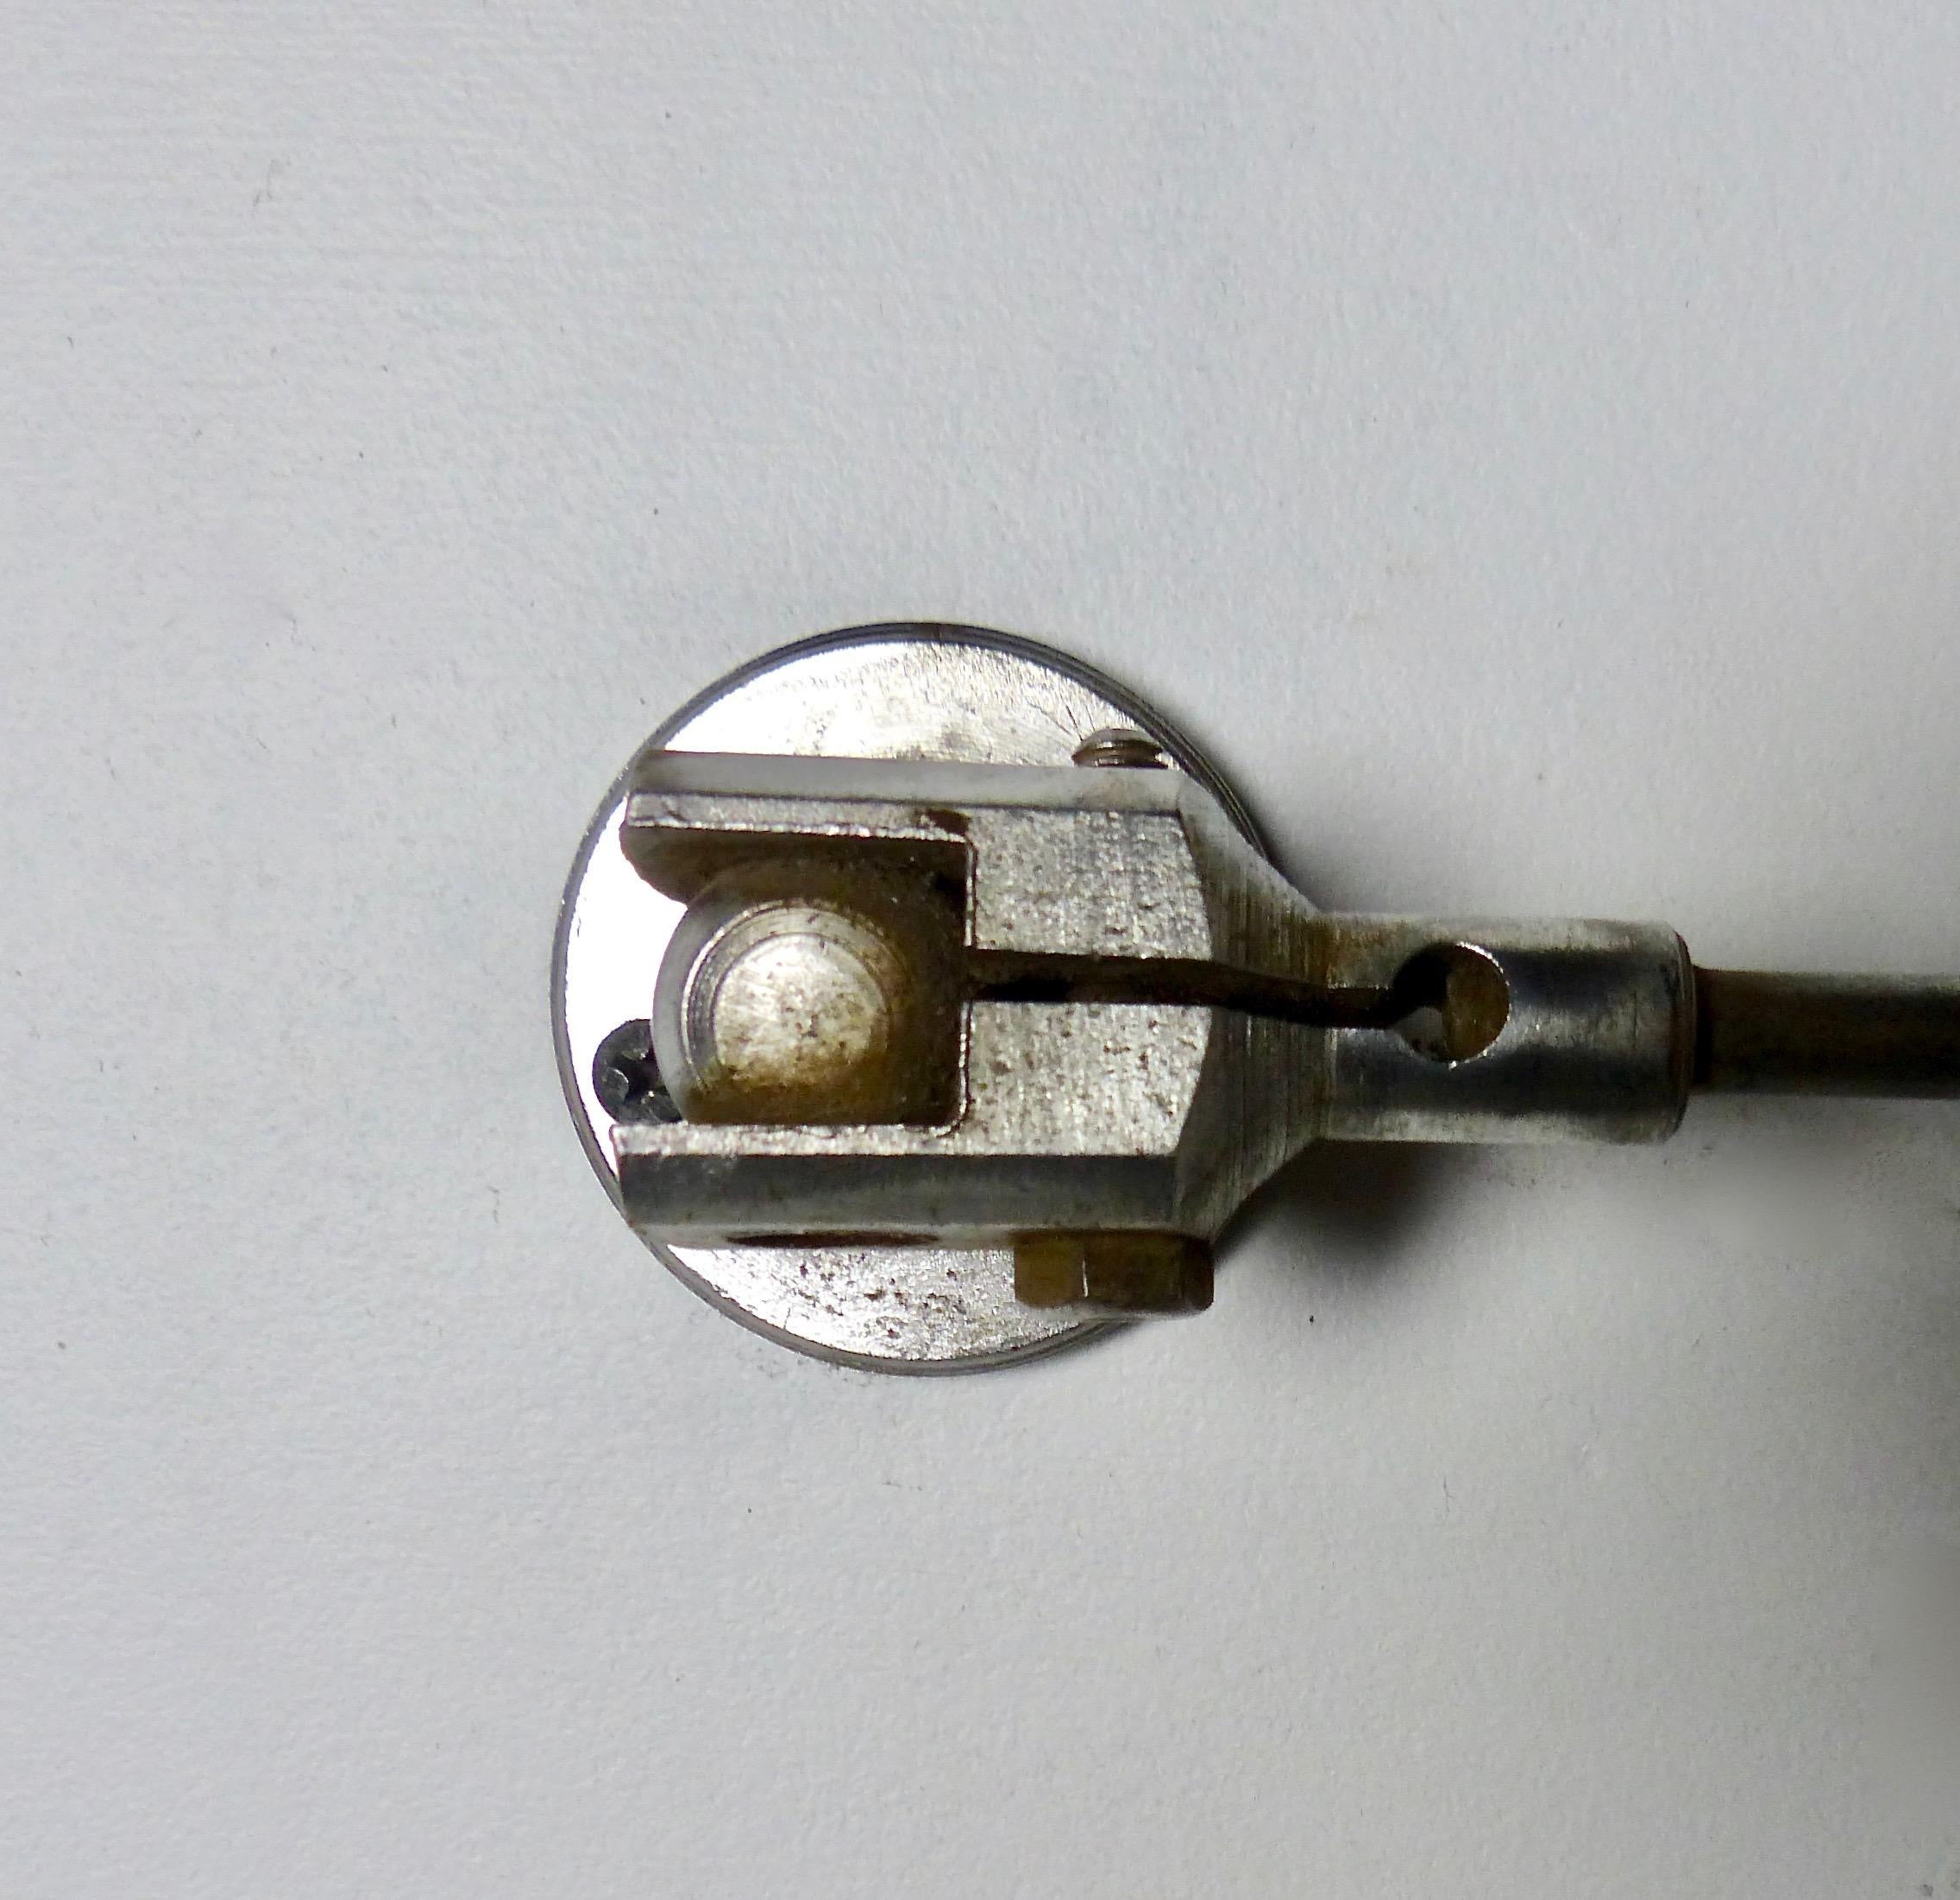 Wall-Mounted Articulating Wall Sconce, circa 1920 (Industriell)